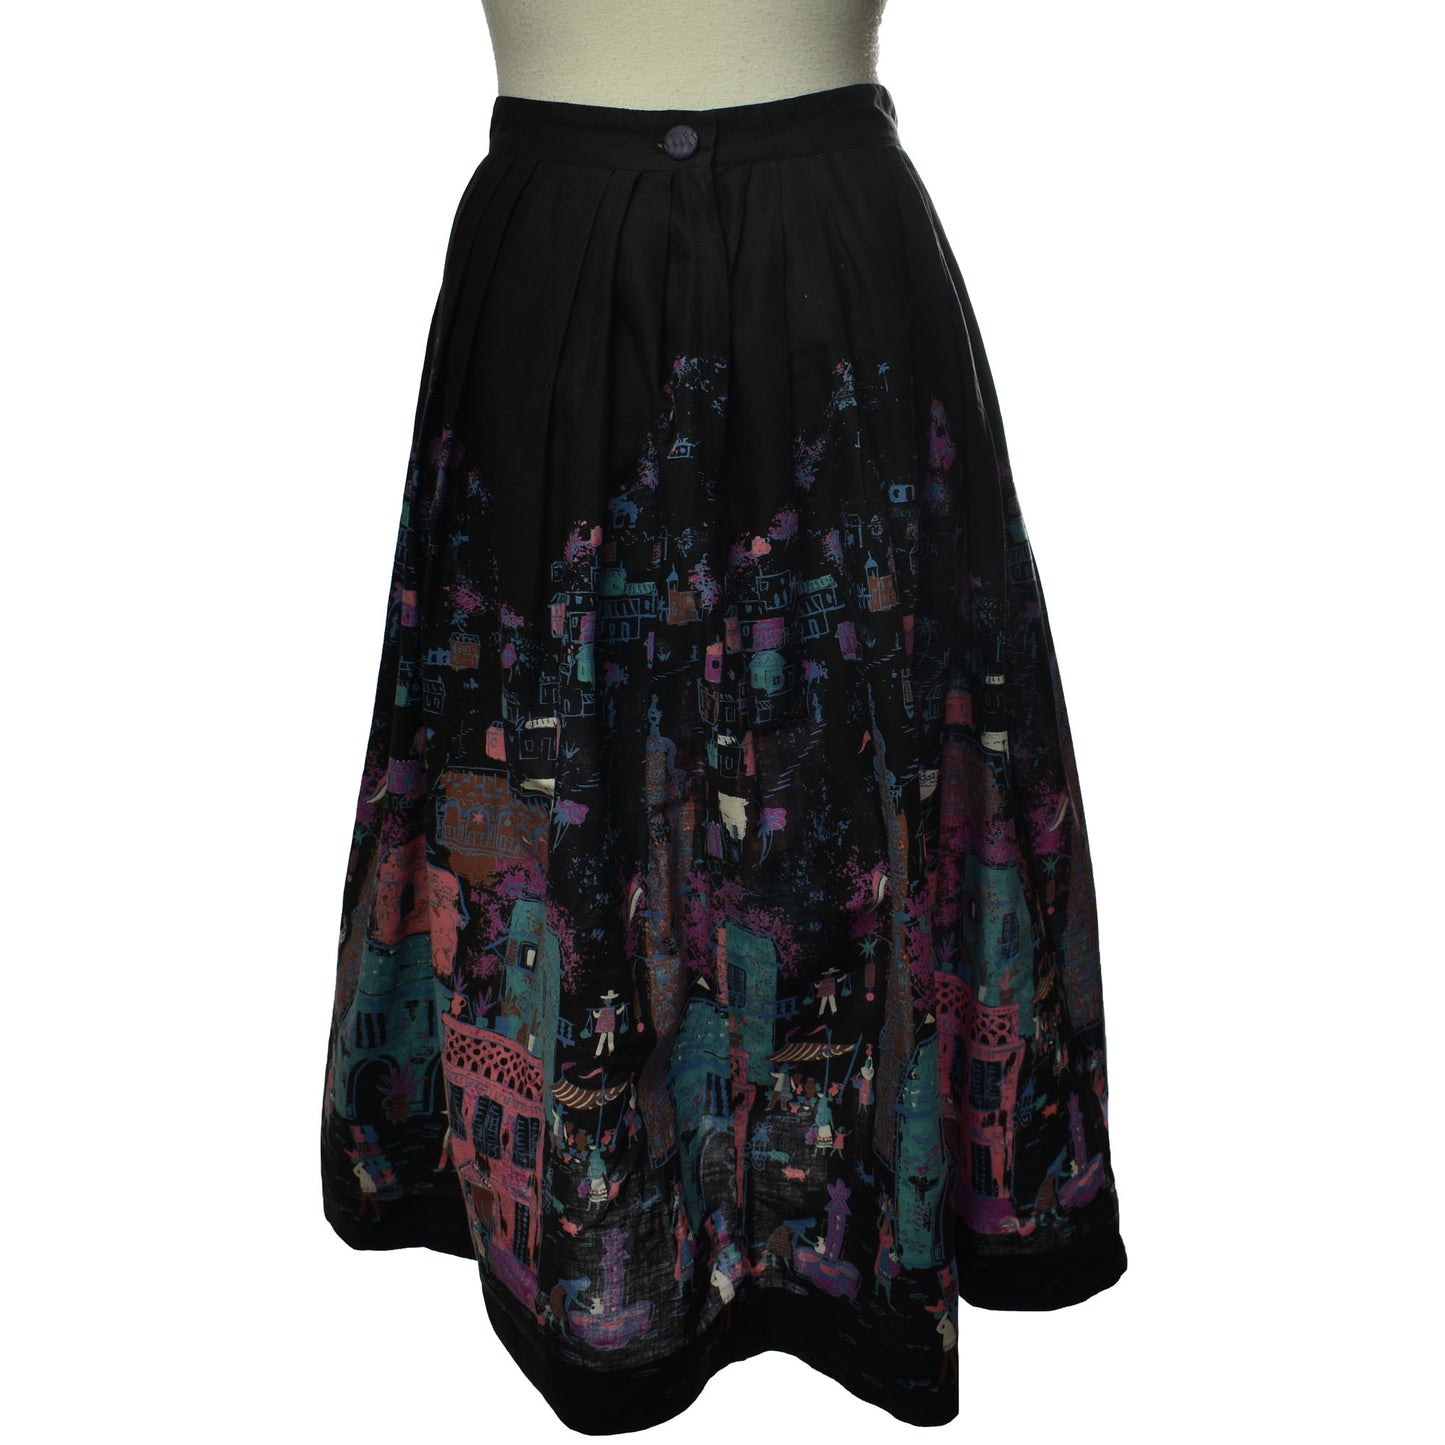 Vintage 50s Black Pleated Circle Skirt with Painted Village Life Tourist Image with Talon Zipper